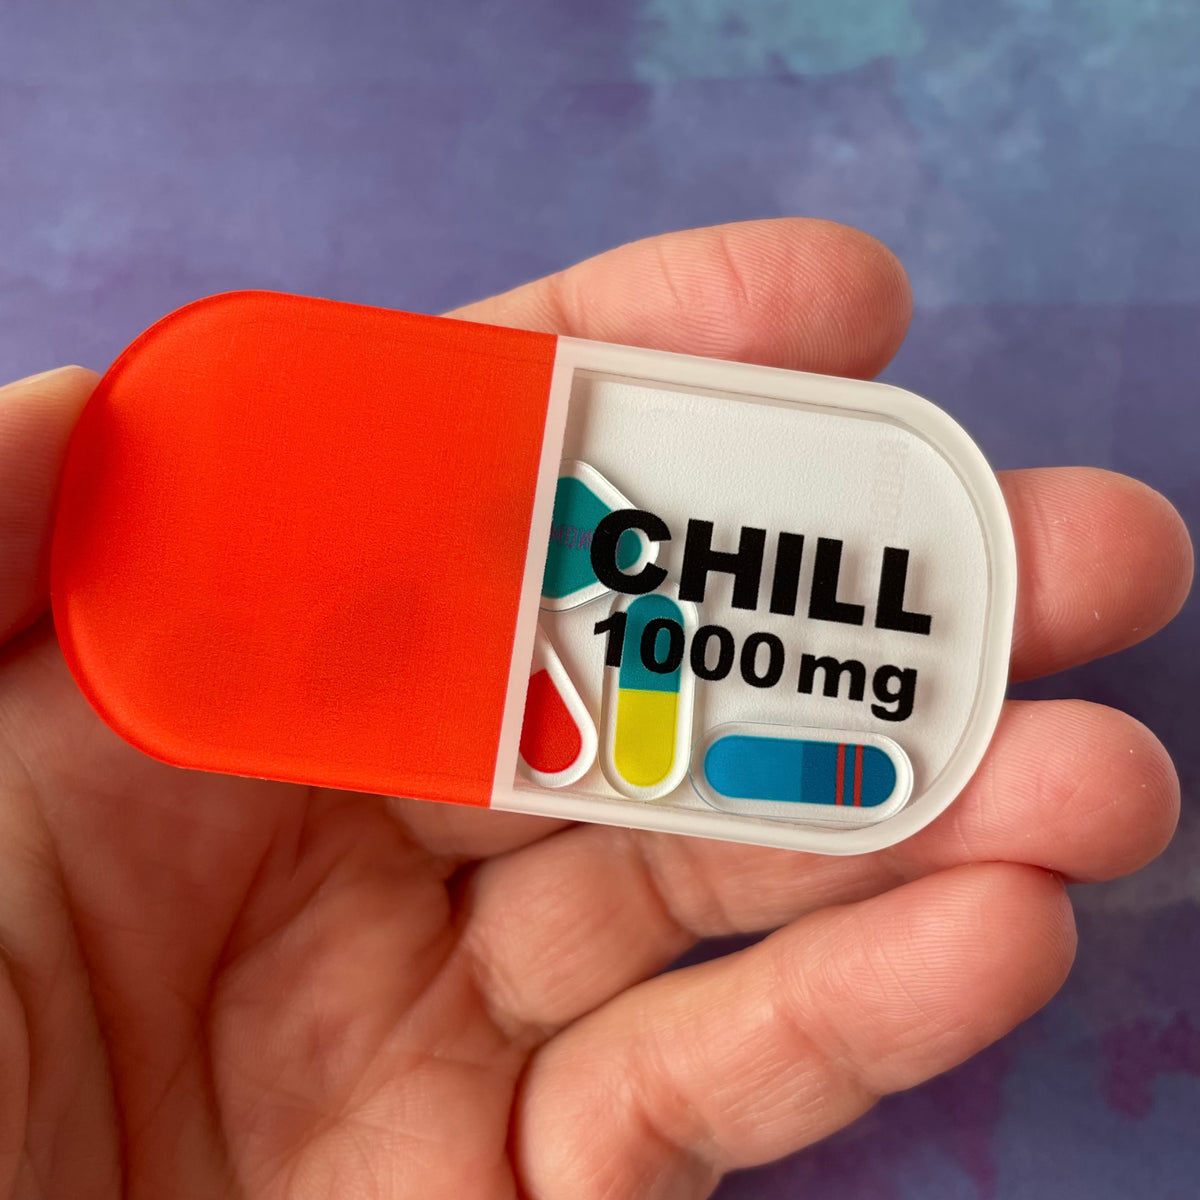 1000mg of Chill Pill - Shaker Swappable Badge Reel Design TOP